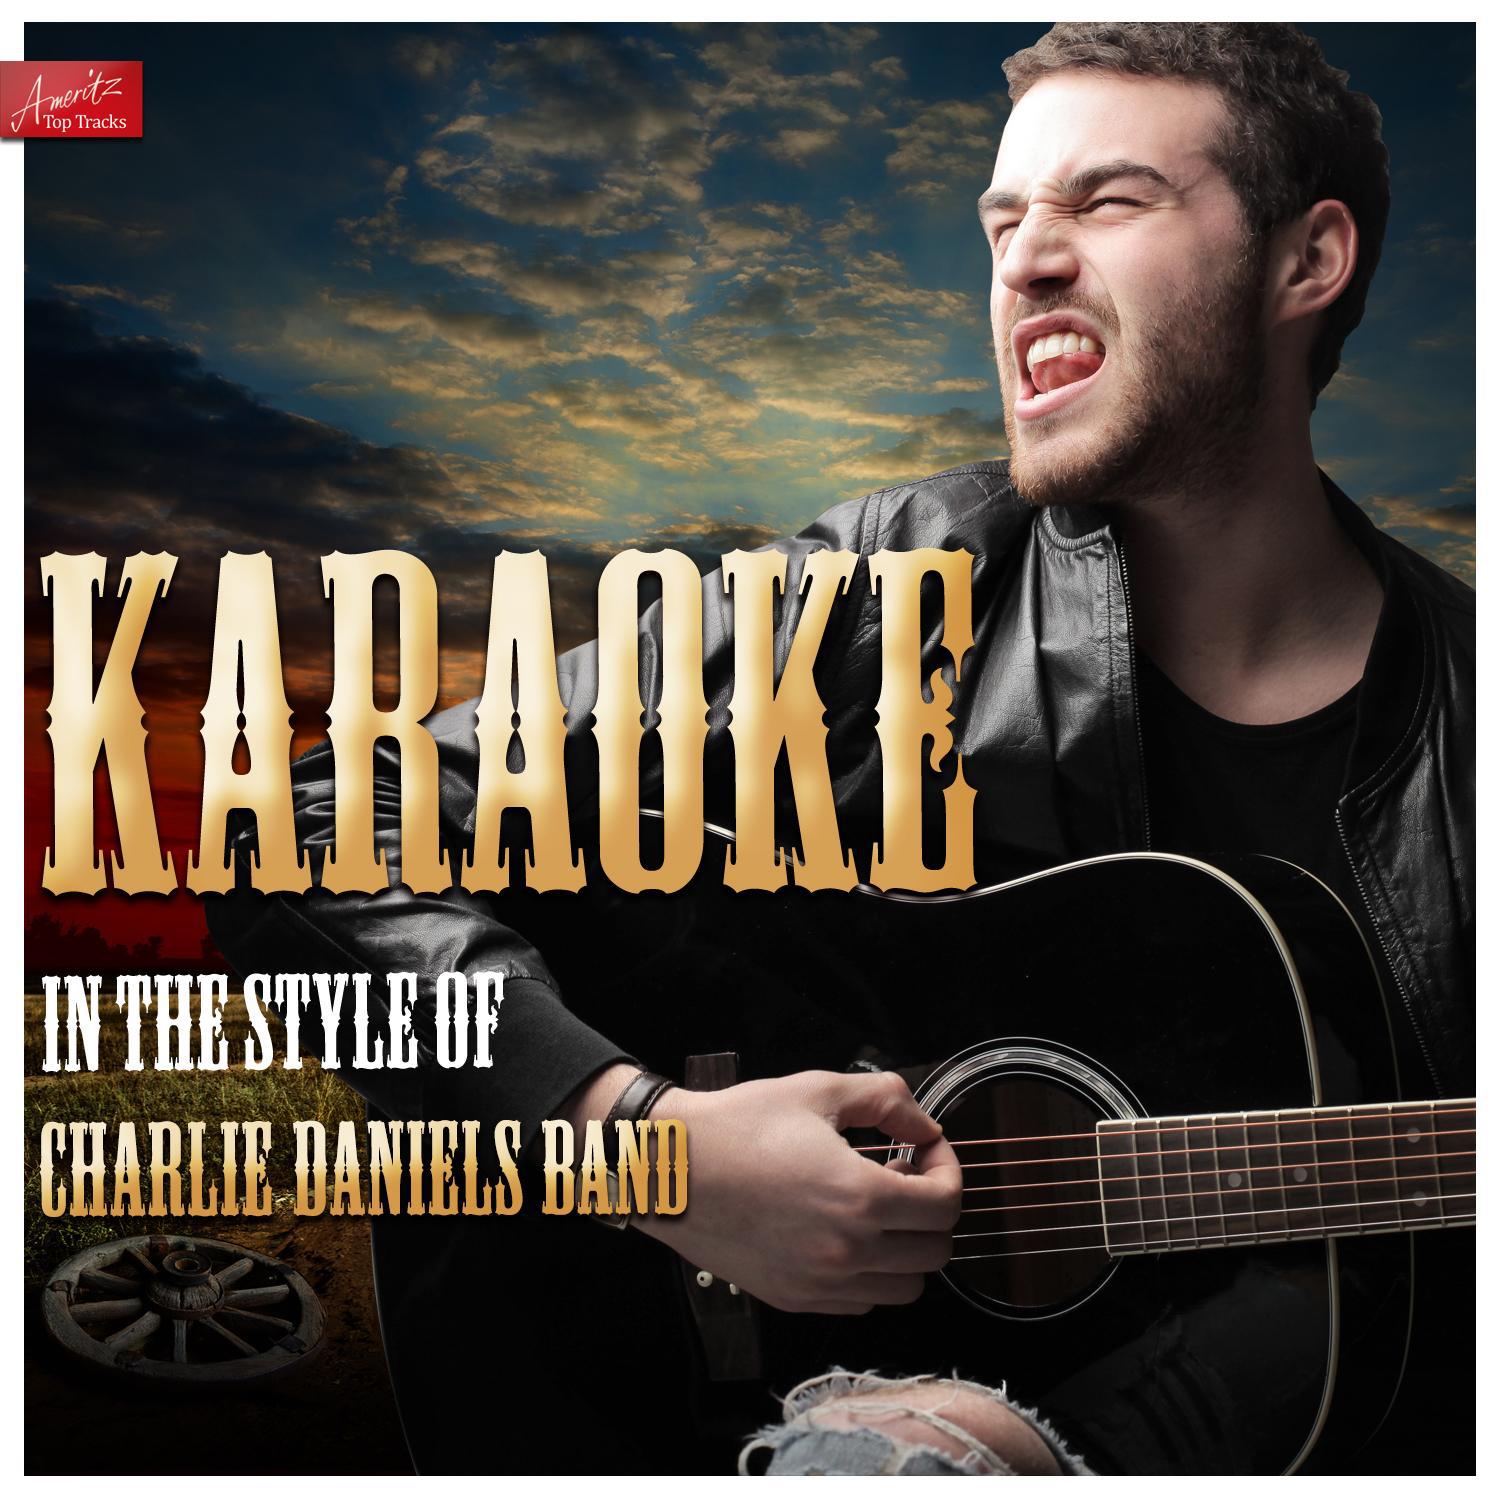 Road Dogs (In the Style of Charlie Daniels Band) [Karaoke Version]